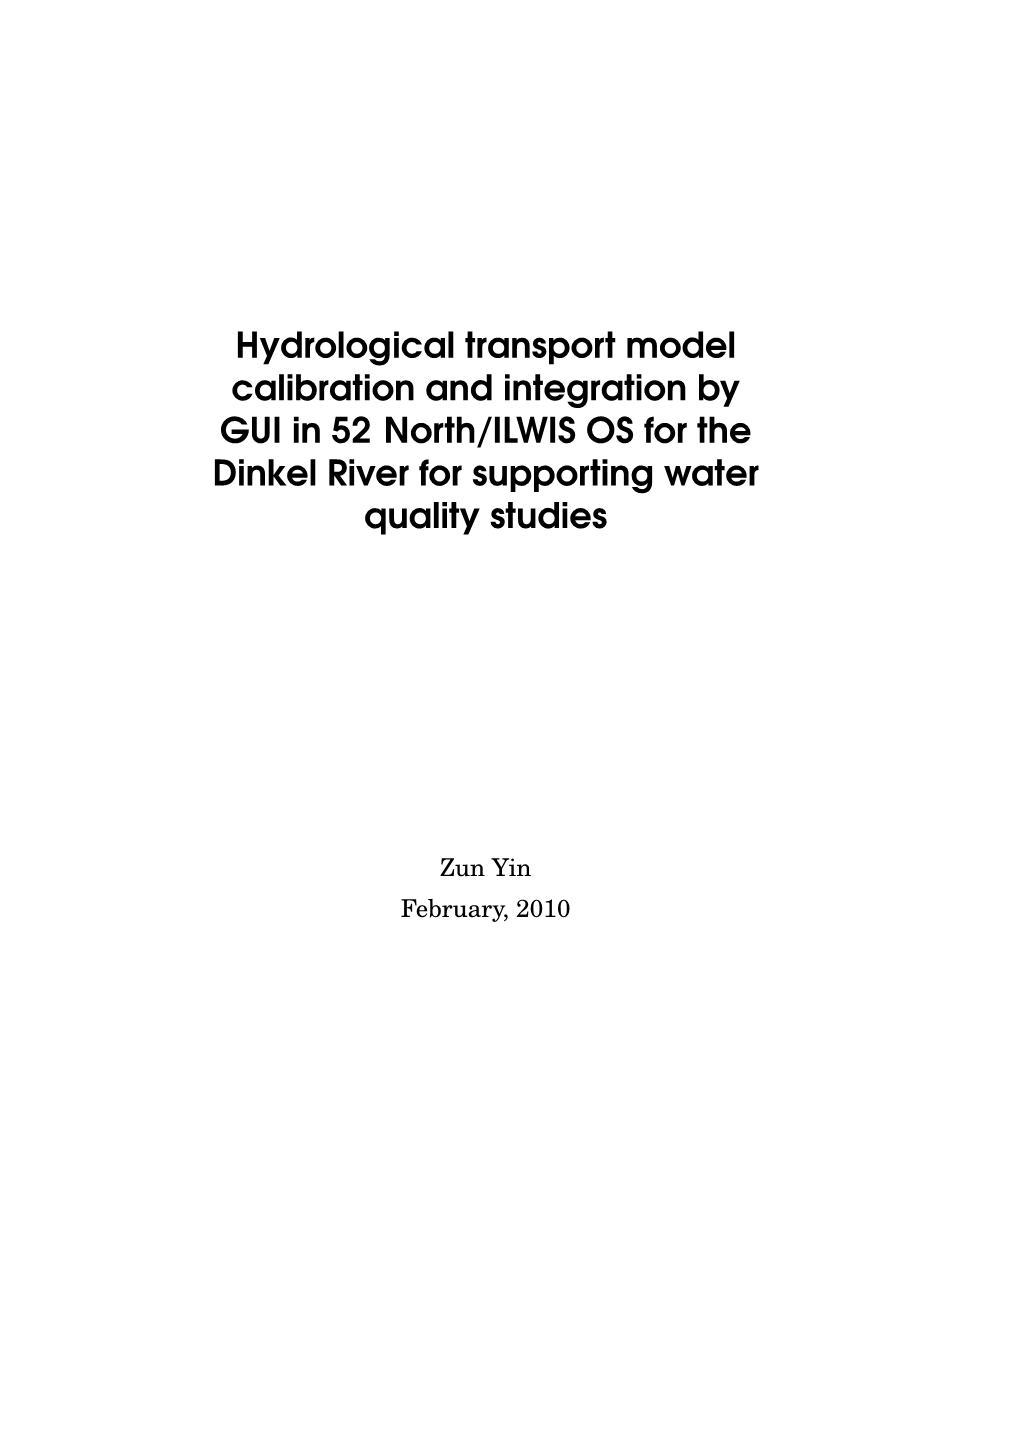 Hydrological Transport Model Calibration and Integration by GUI in 52Onorth/ILWIS OS for the Dinkel River for Supporting Water Quality Studies